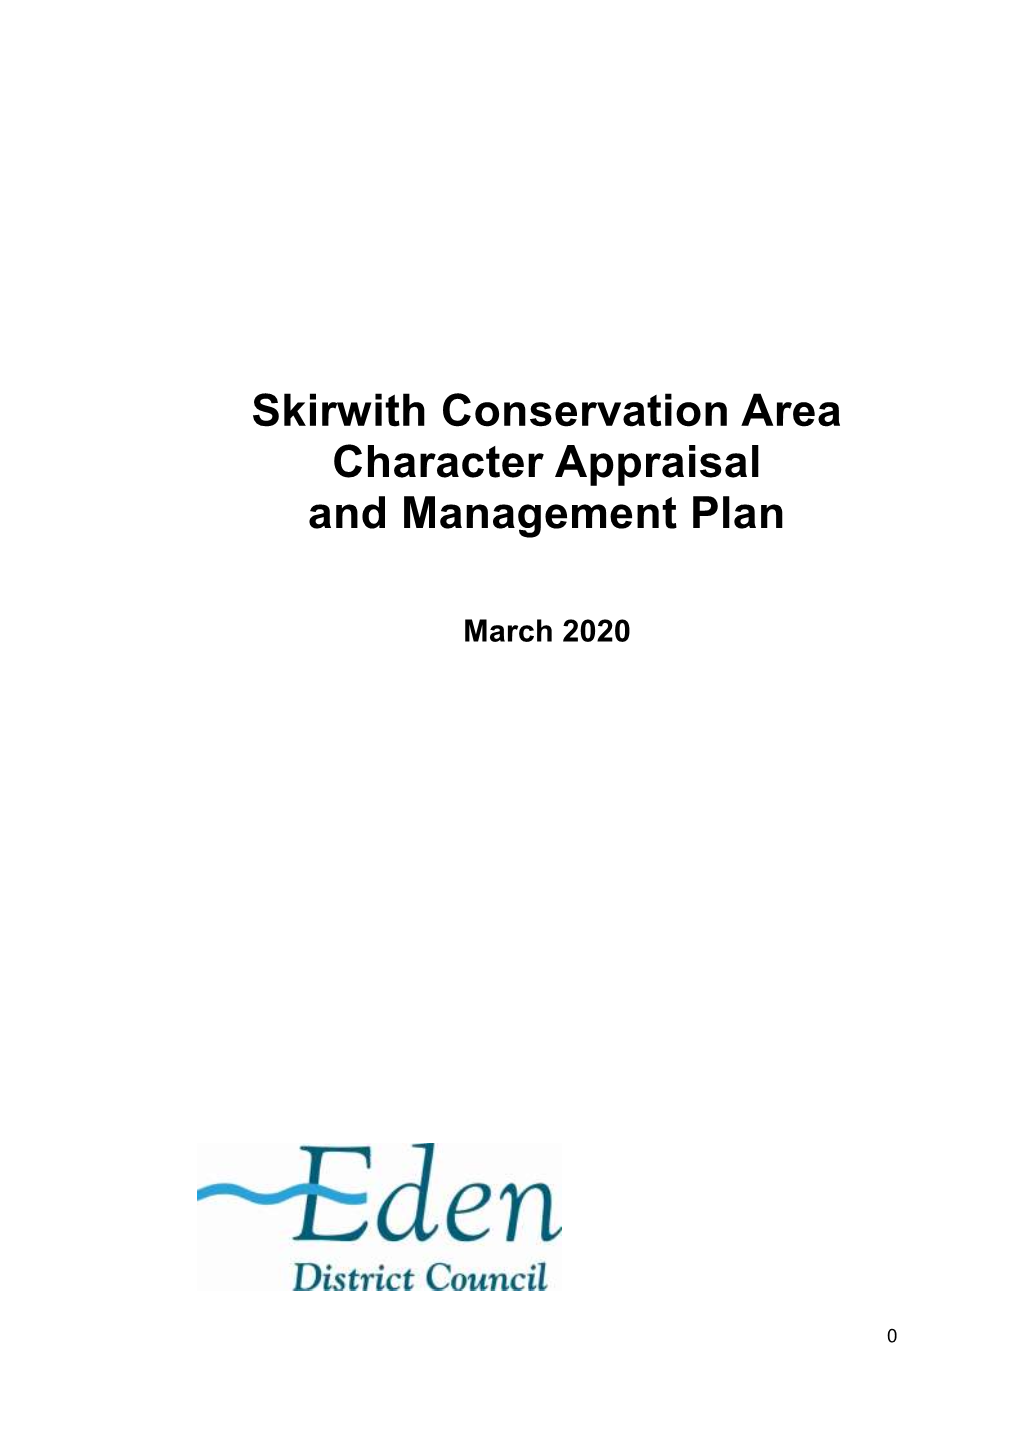 Skirwith Conservation Area Character Appraisal and Management Plan